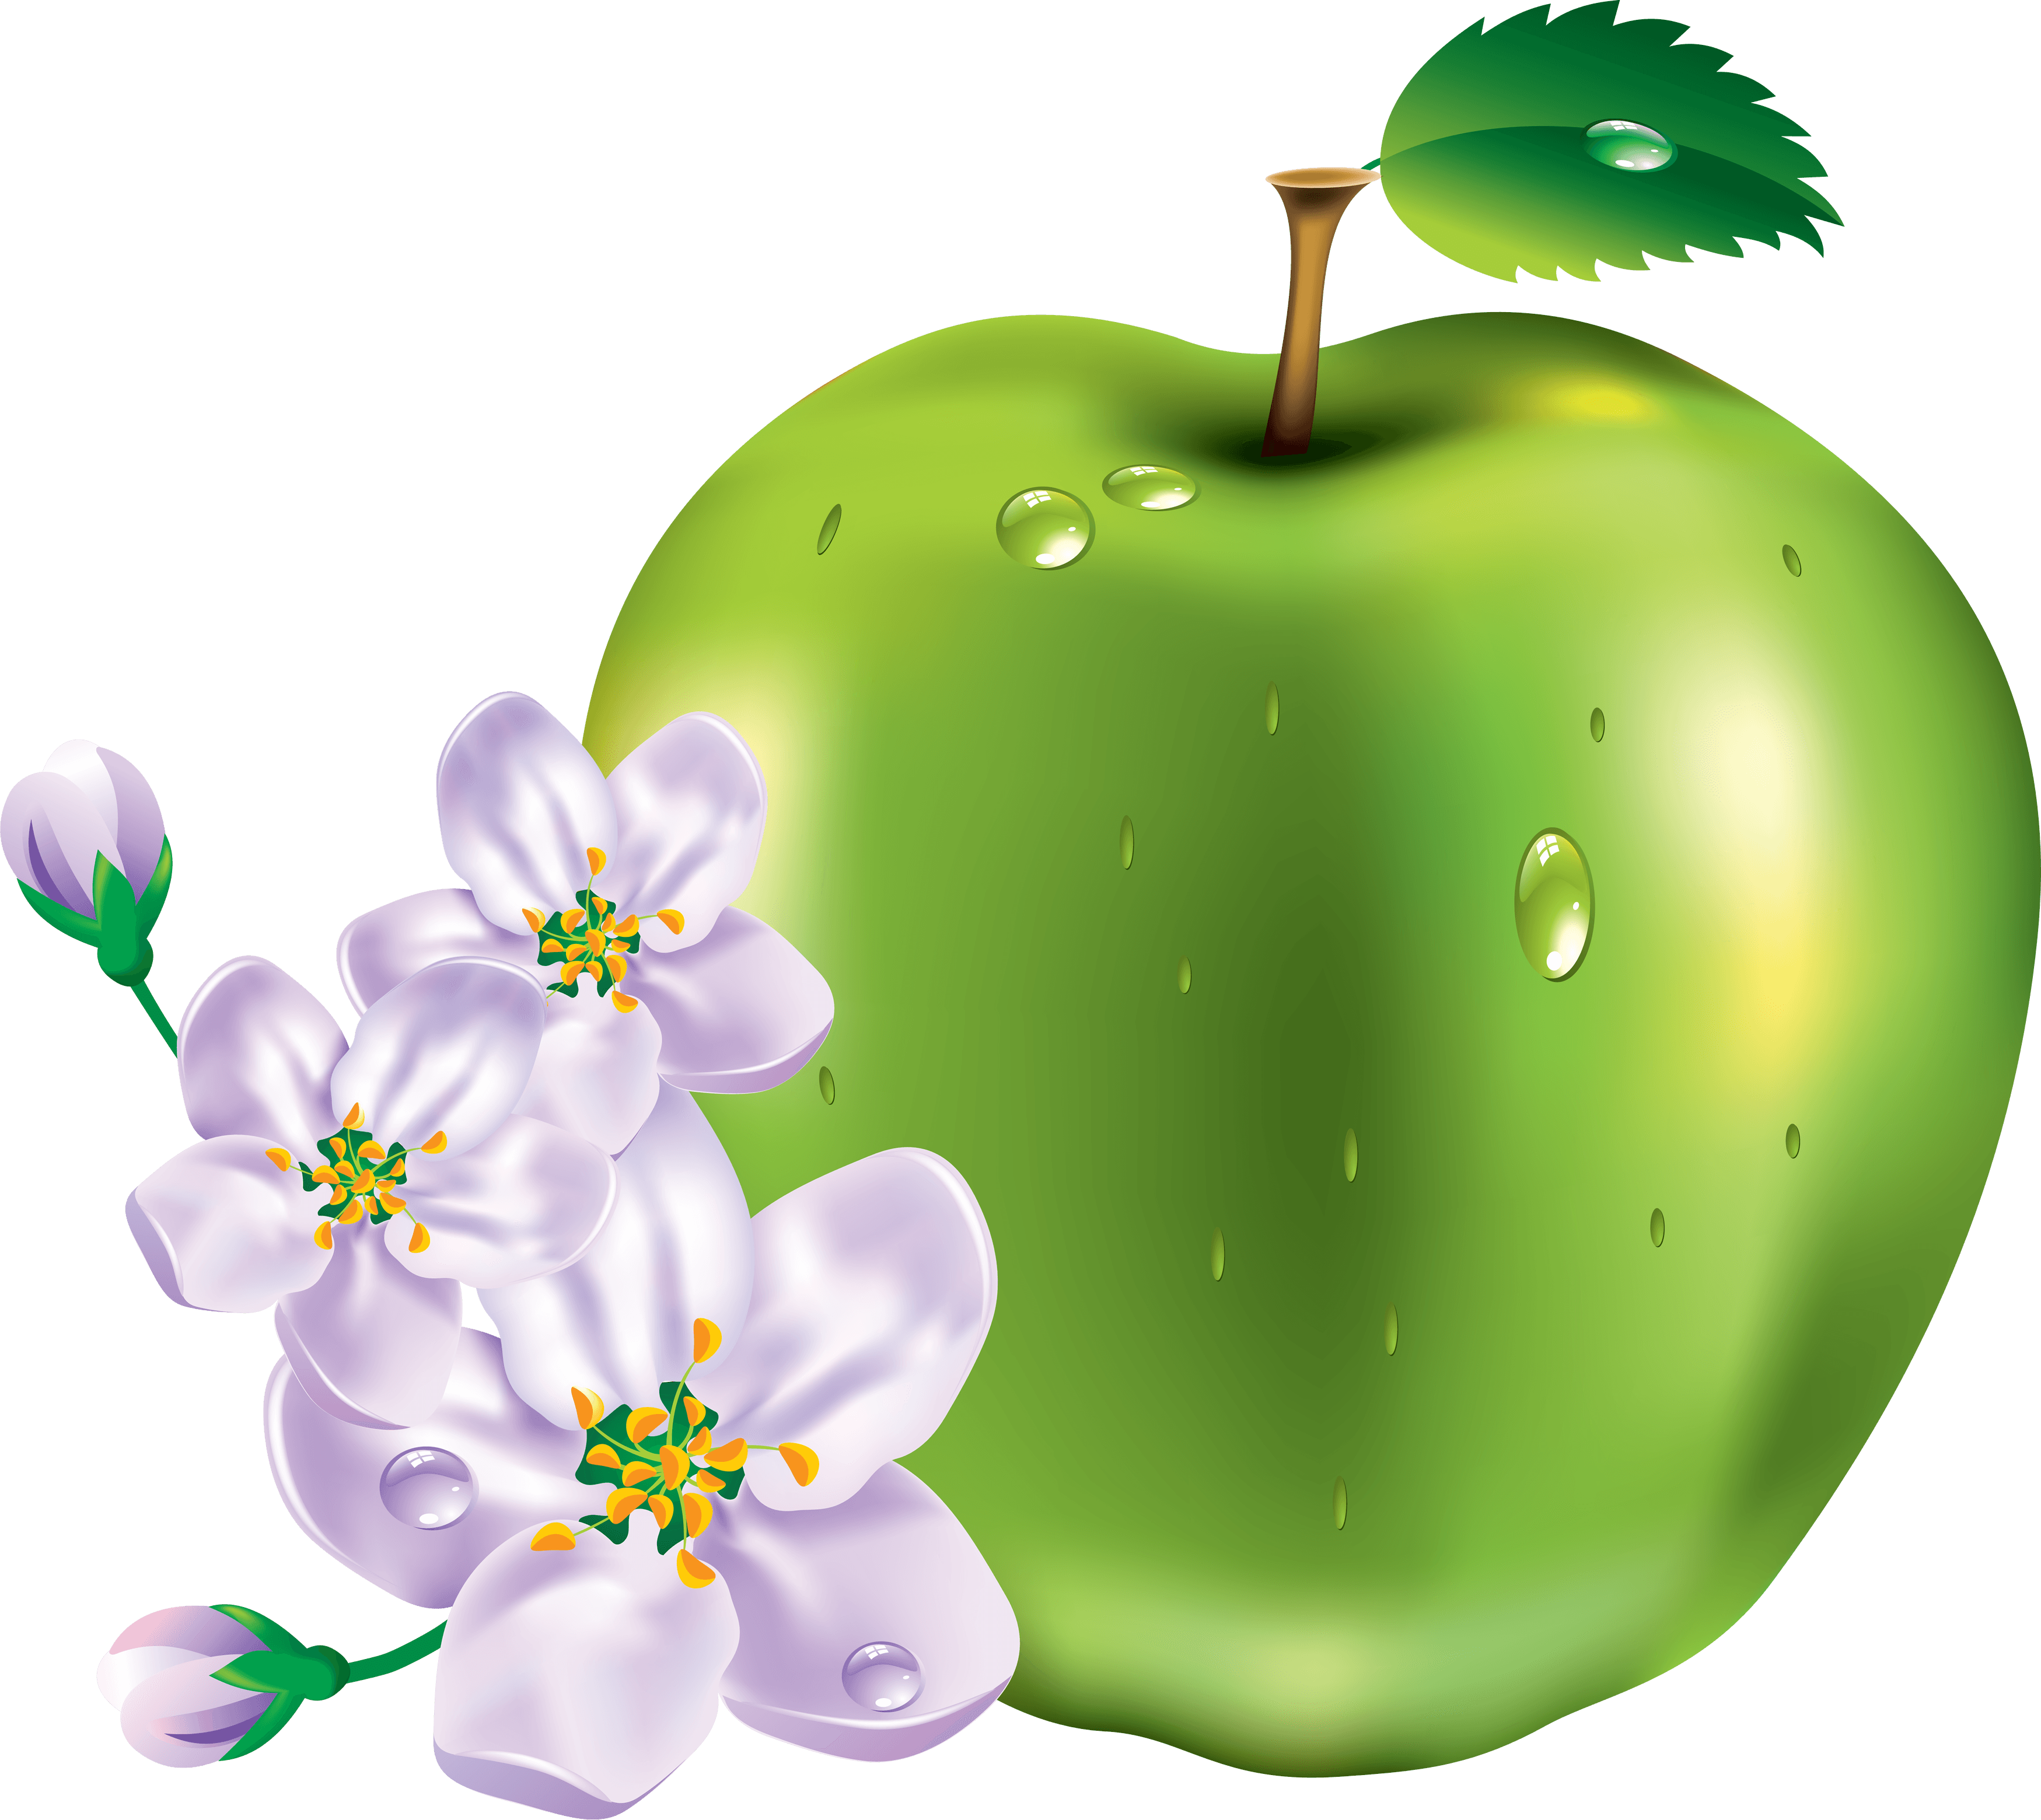 15 green apple png image